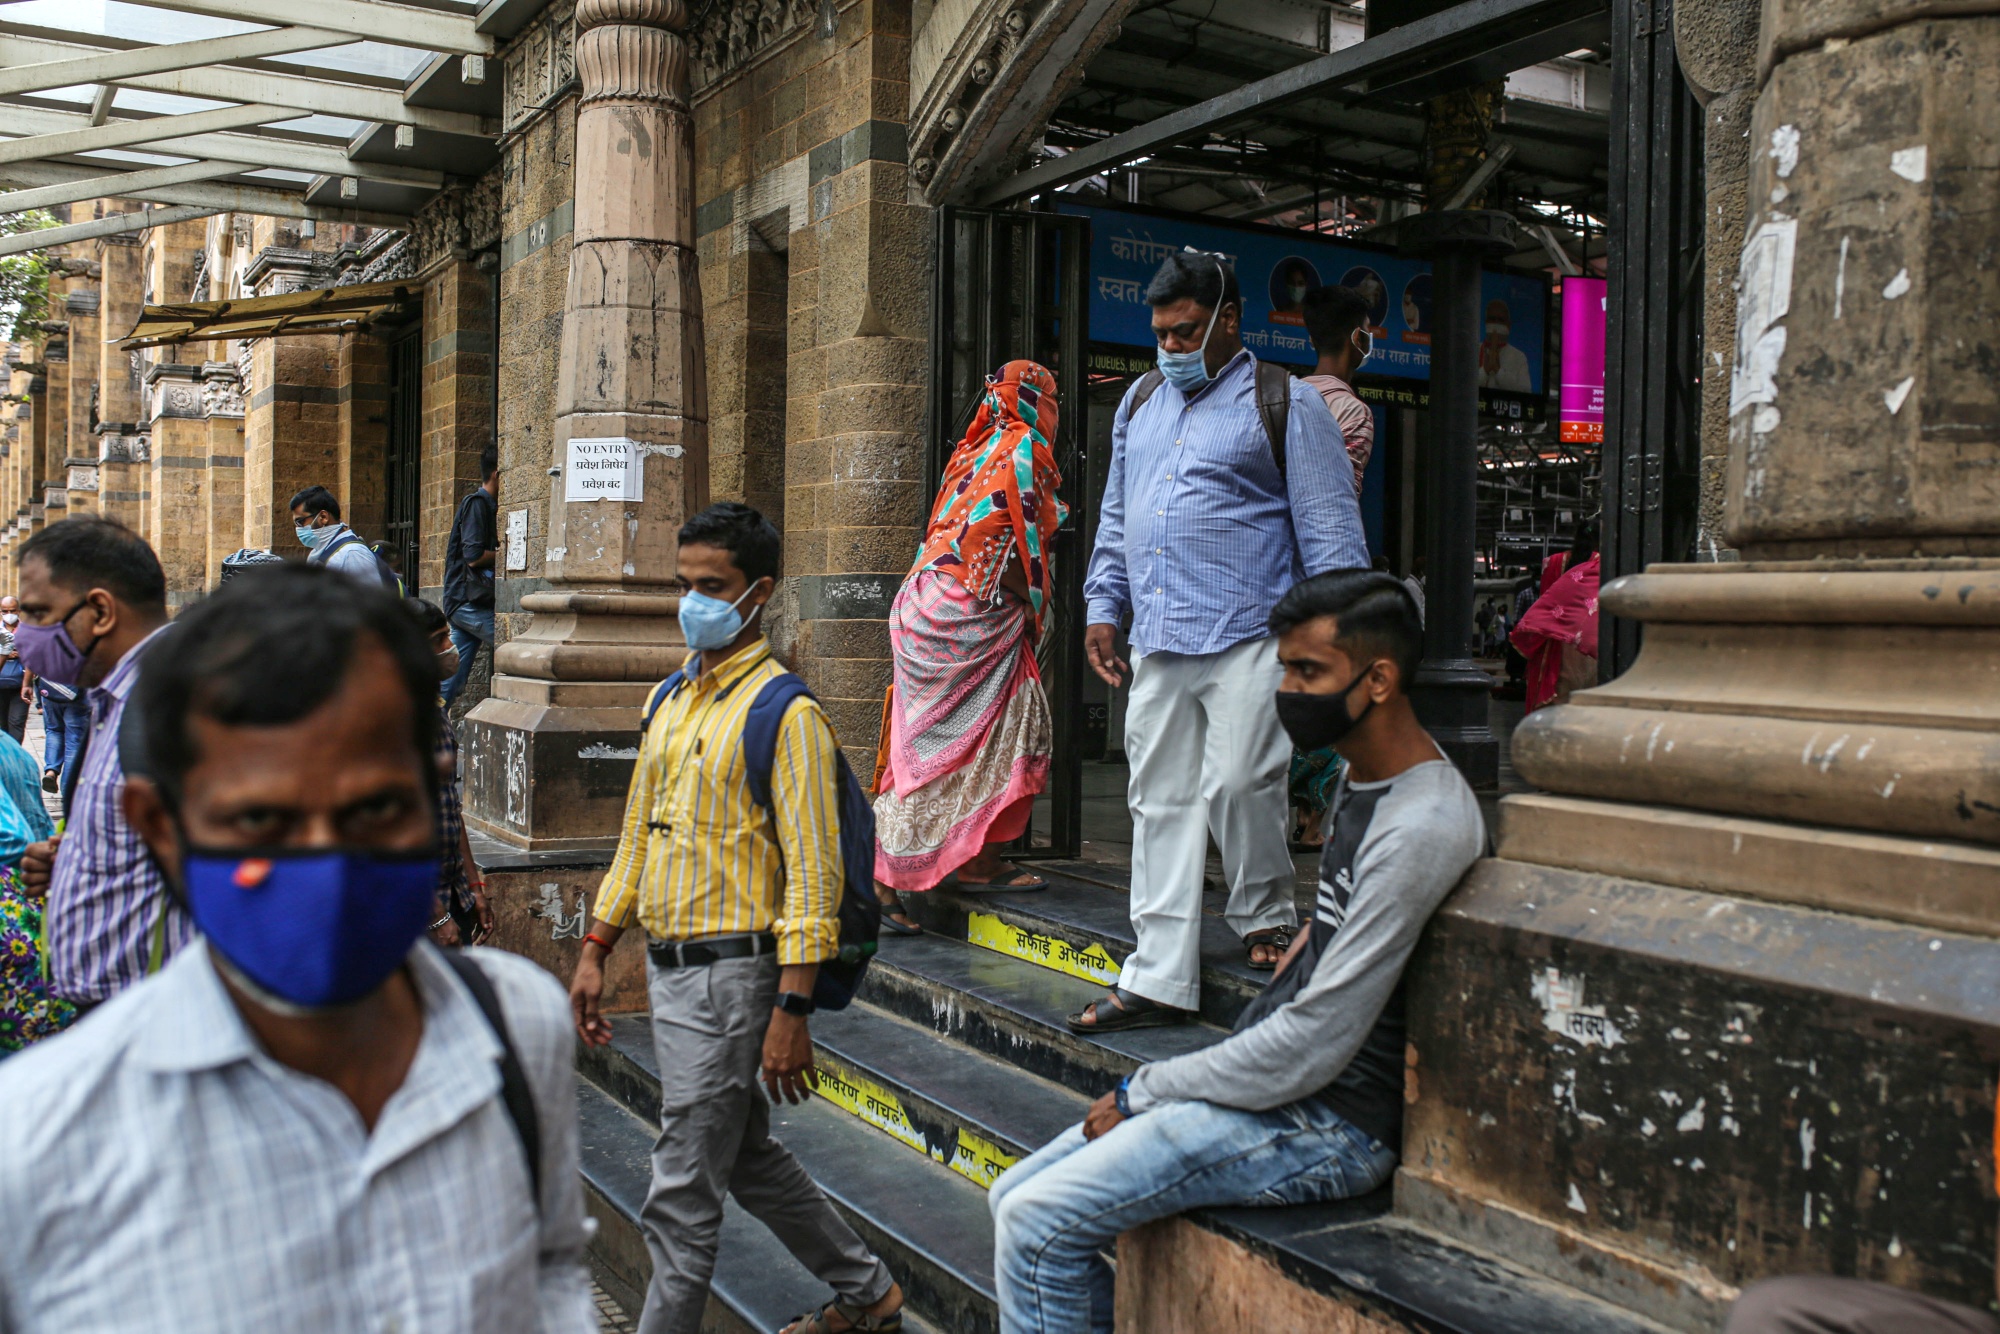 u.s. scales back india travel warning as covid outbreak eases - bloomberg